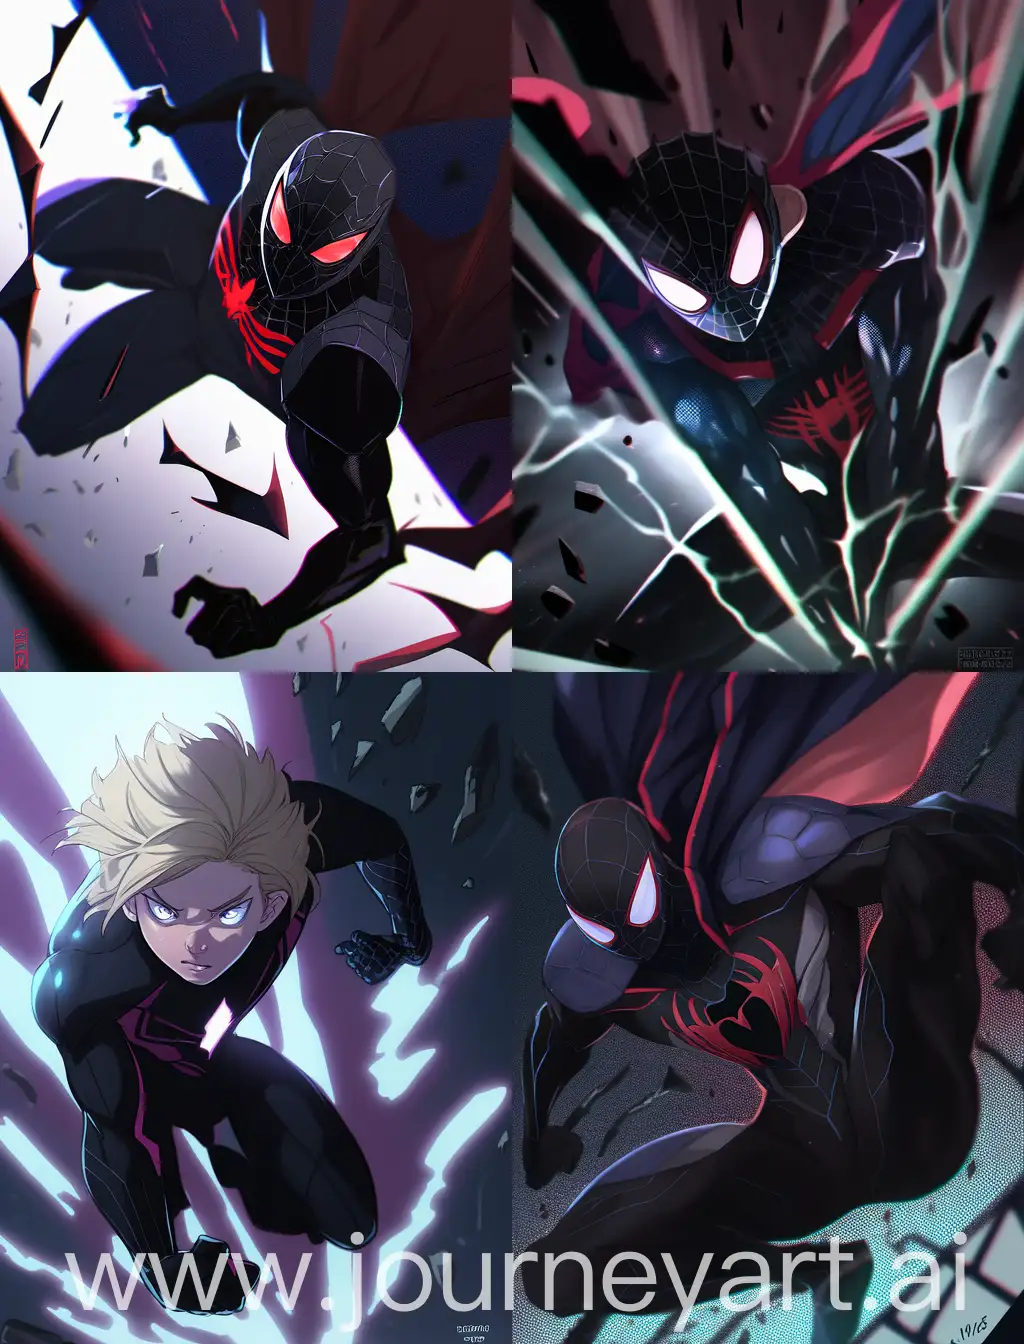 Spider-Man in a black suit, with a cape on his body to the ground, without a mask, with disheveled short hair, in anime style, in the form of concept art, There are obvious scars on the hero's face, the face itself is serious